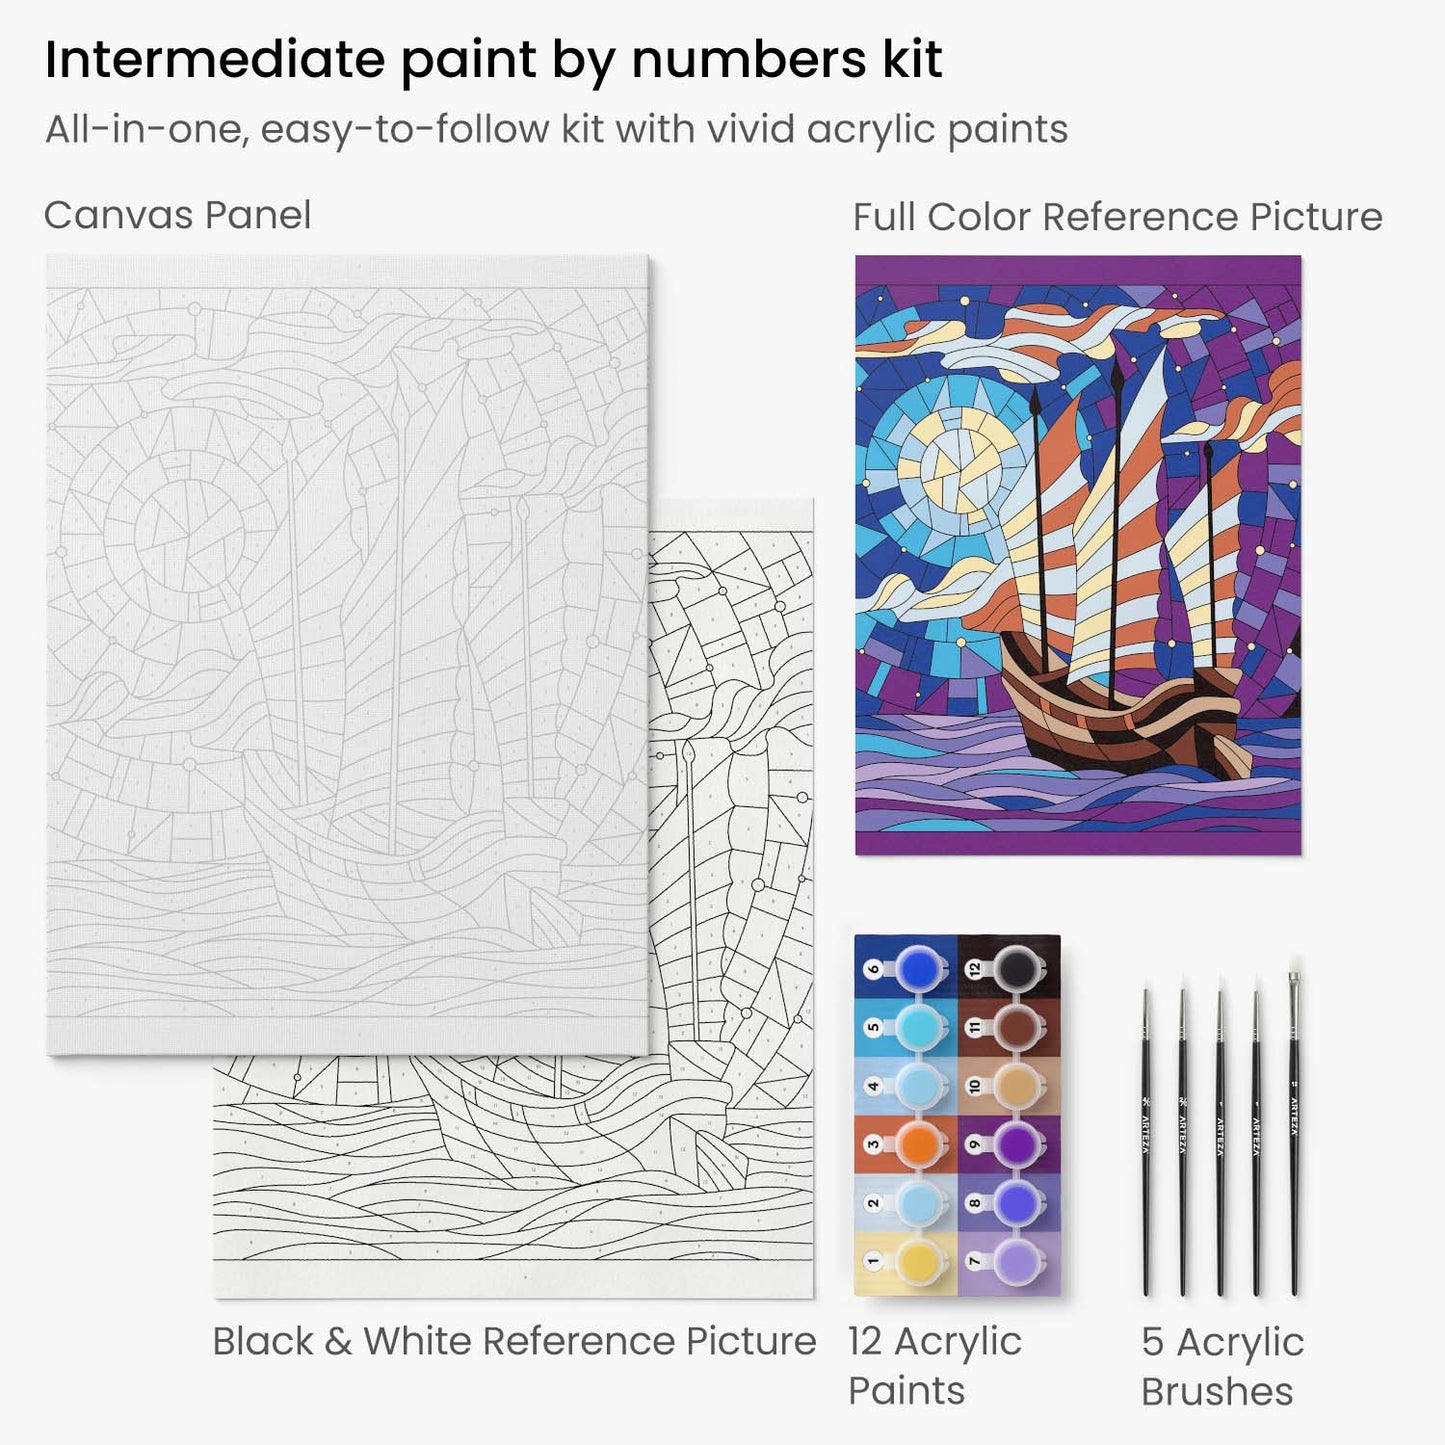 Paint by Numbers, Boat - Intermediate Level Kit